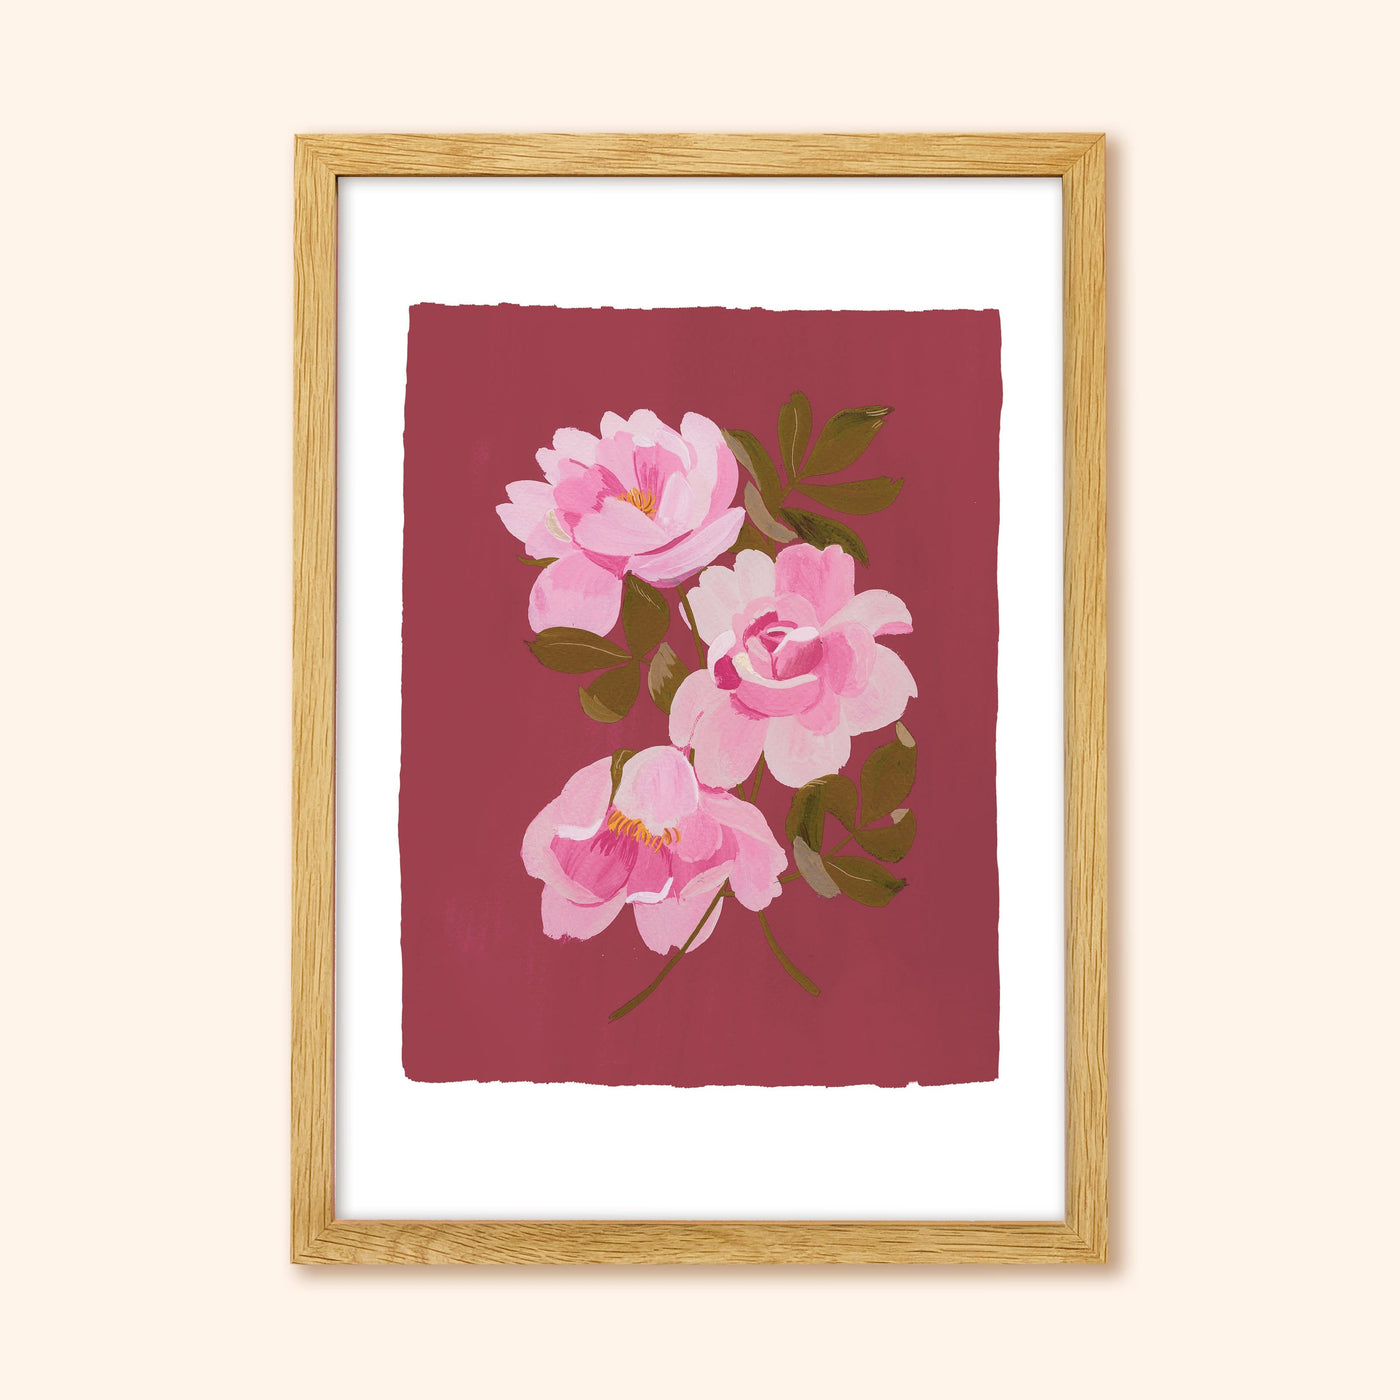 A Botanical Floral Print Of Three Pink Tea Roses On A Deep Pink Background In An Oak Frame - Annie Dornan Smith